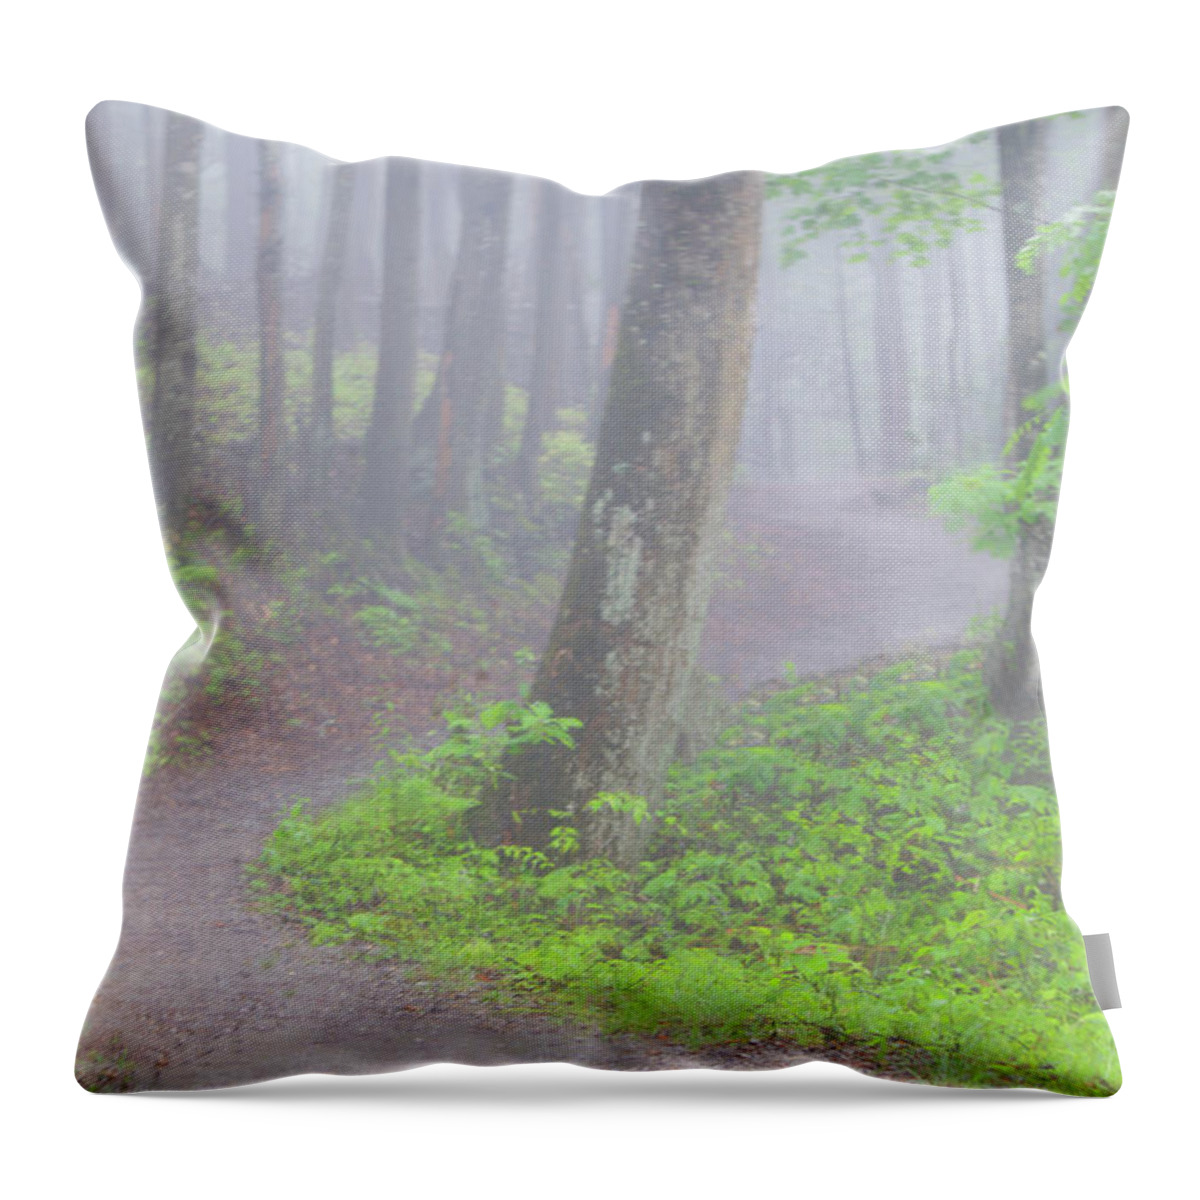 Art Prints Throw Pillow featuring the photograph Baskins Creek Trail by Nunweiler Photography